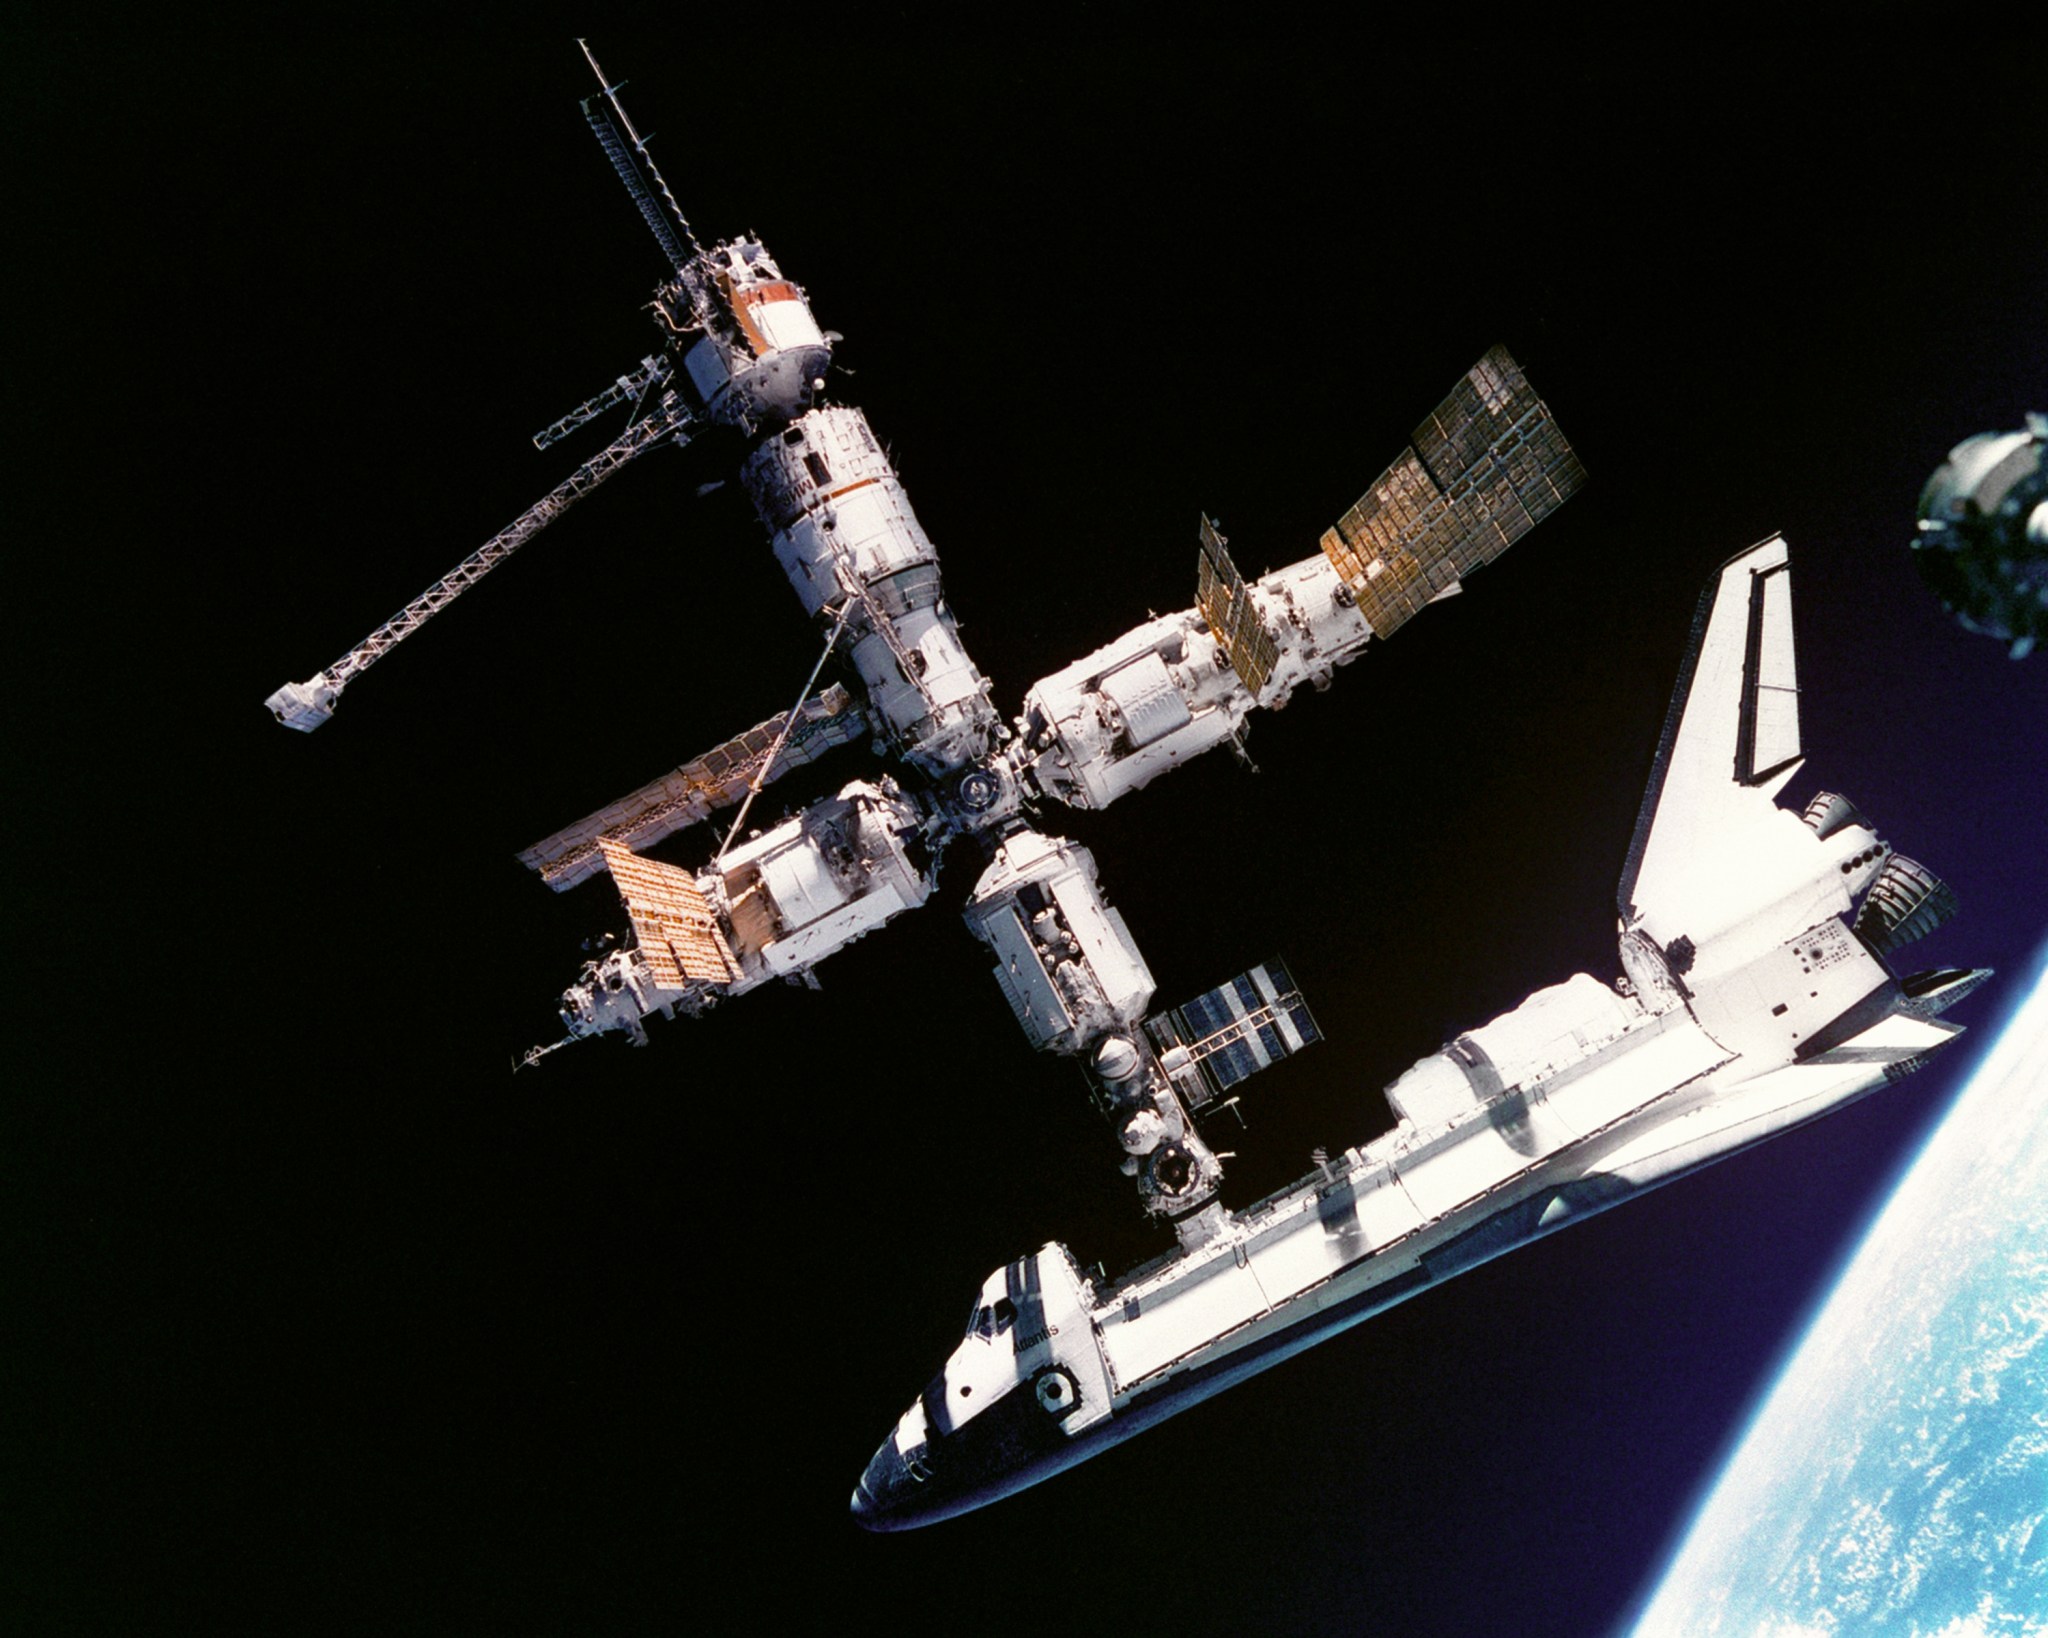 Space shuttle Atlantis docked with the Russian Mir space station in 1995.